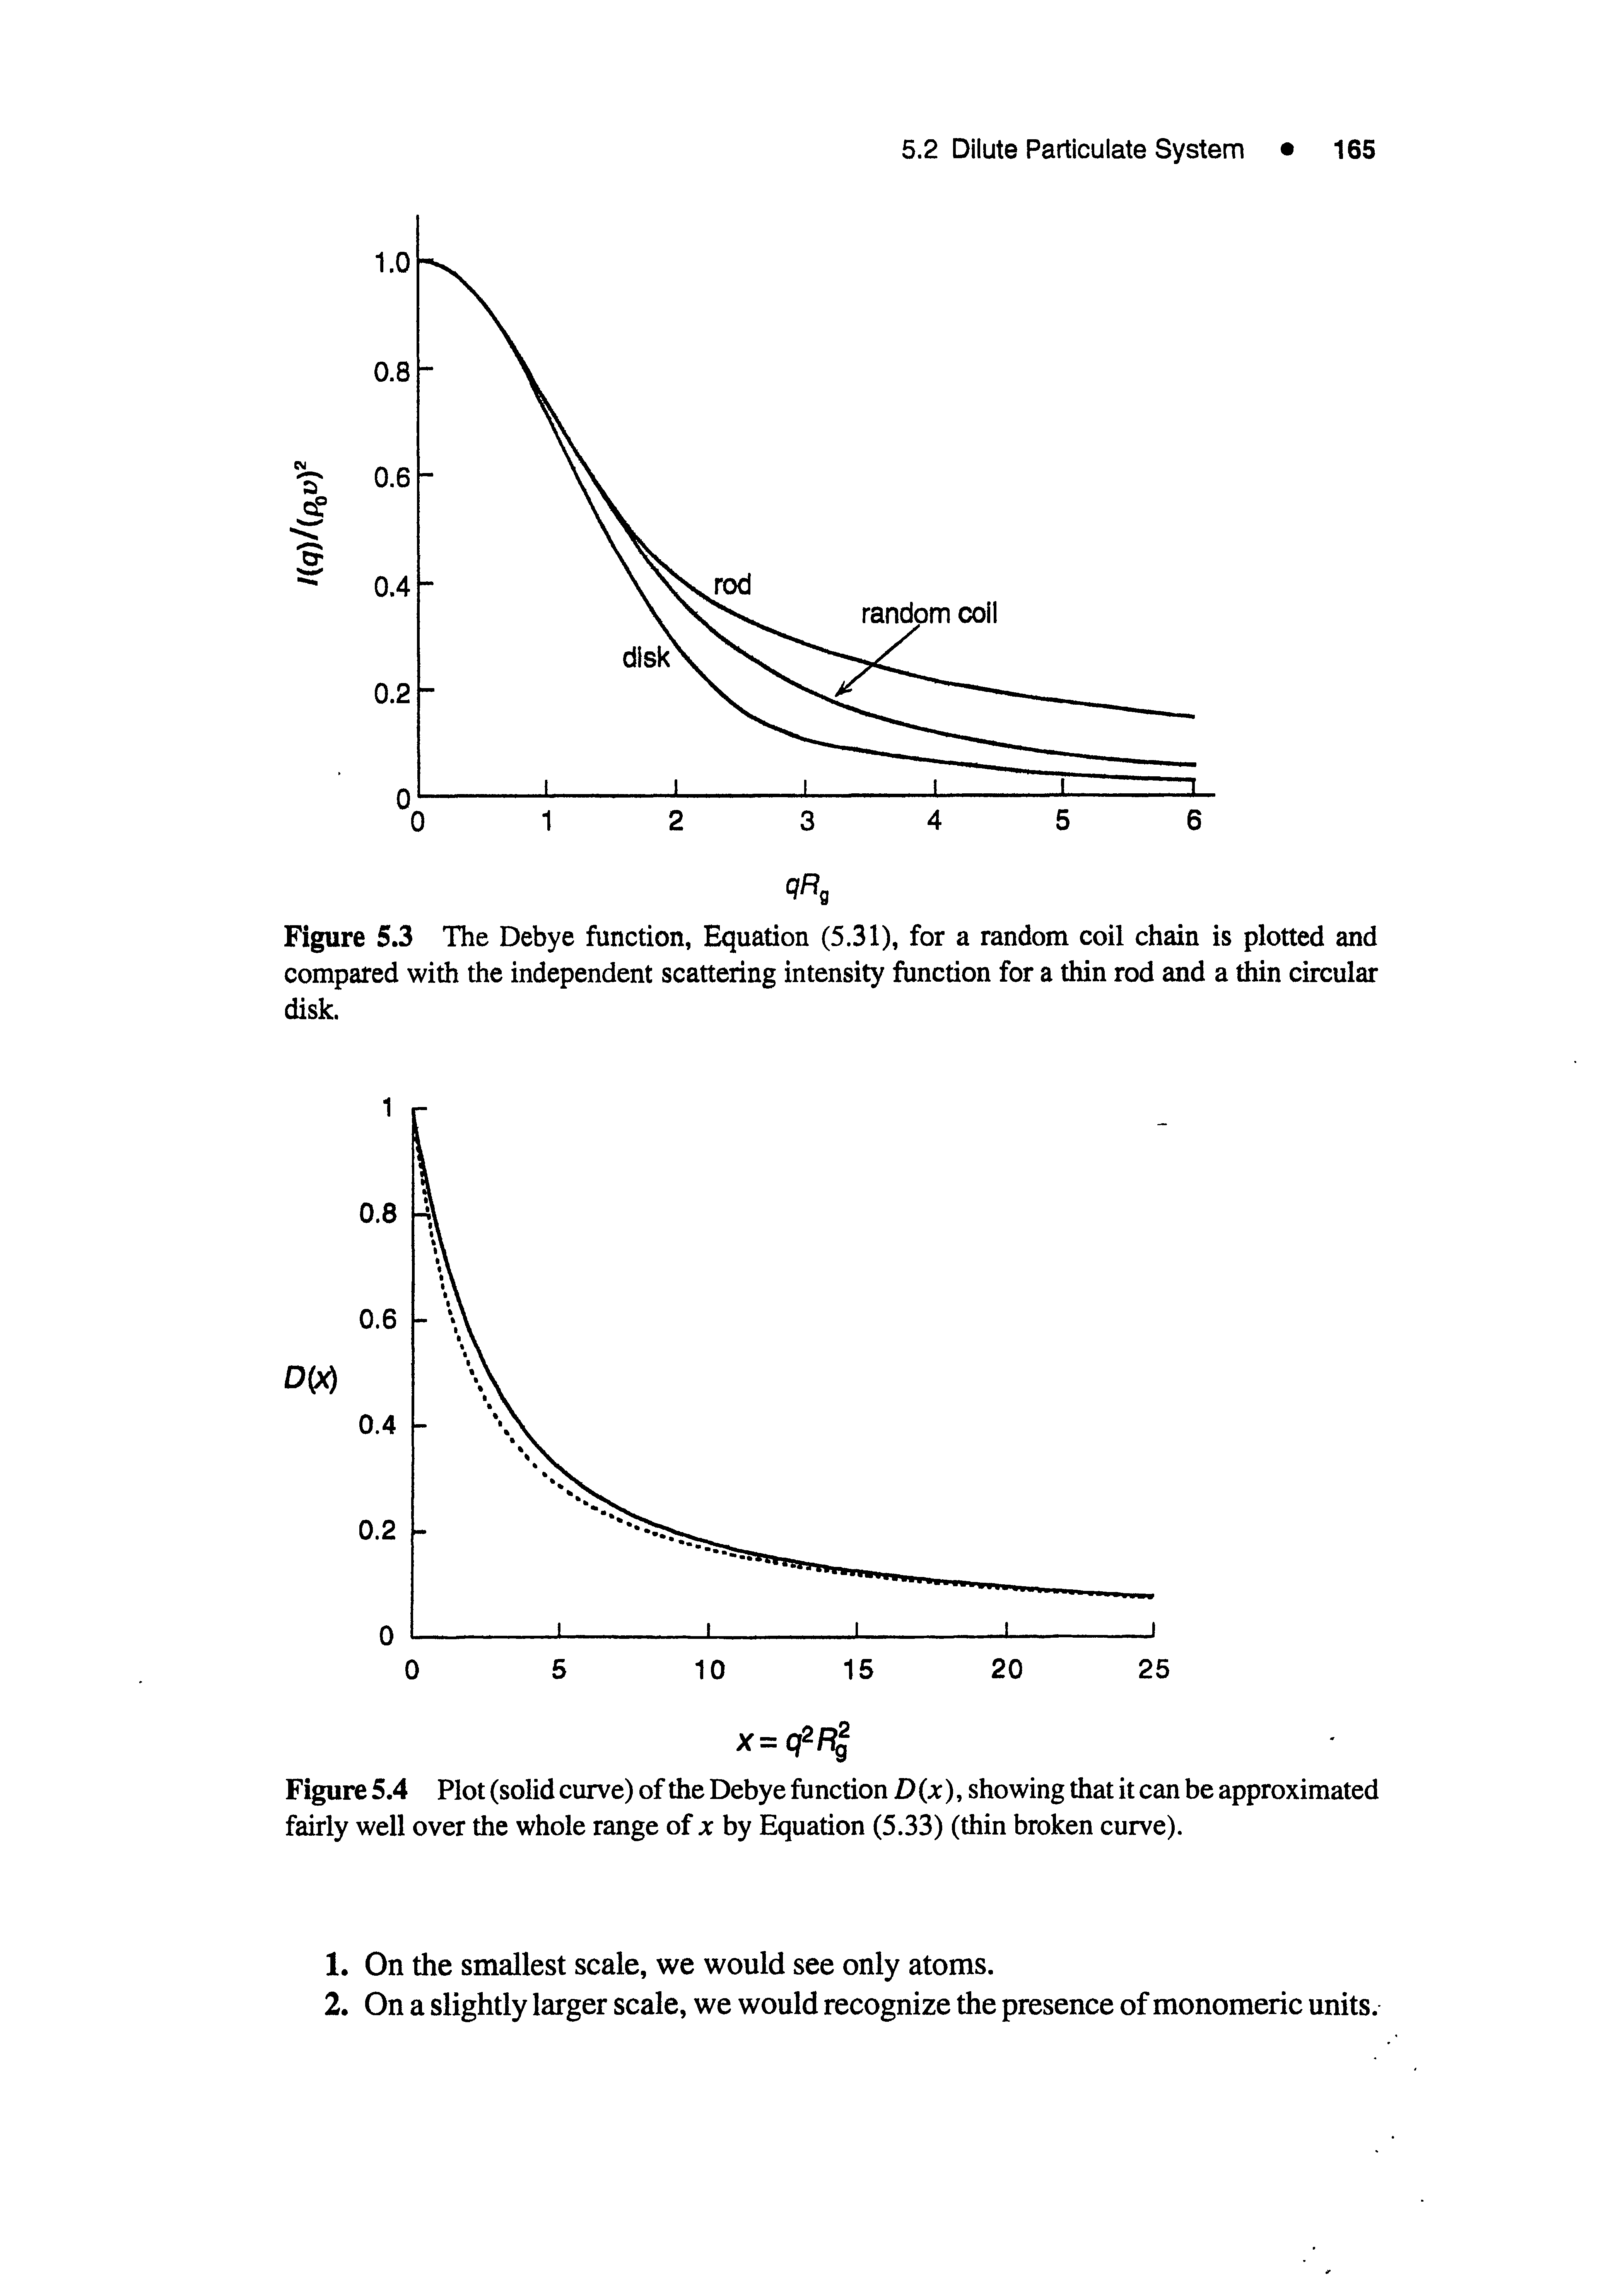 Figure 5.3 The Debye function, Equation (5.31), for a random coil chain is plotted and compared with the independent scattering intensity function for a thin rod and a thin circular disk.